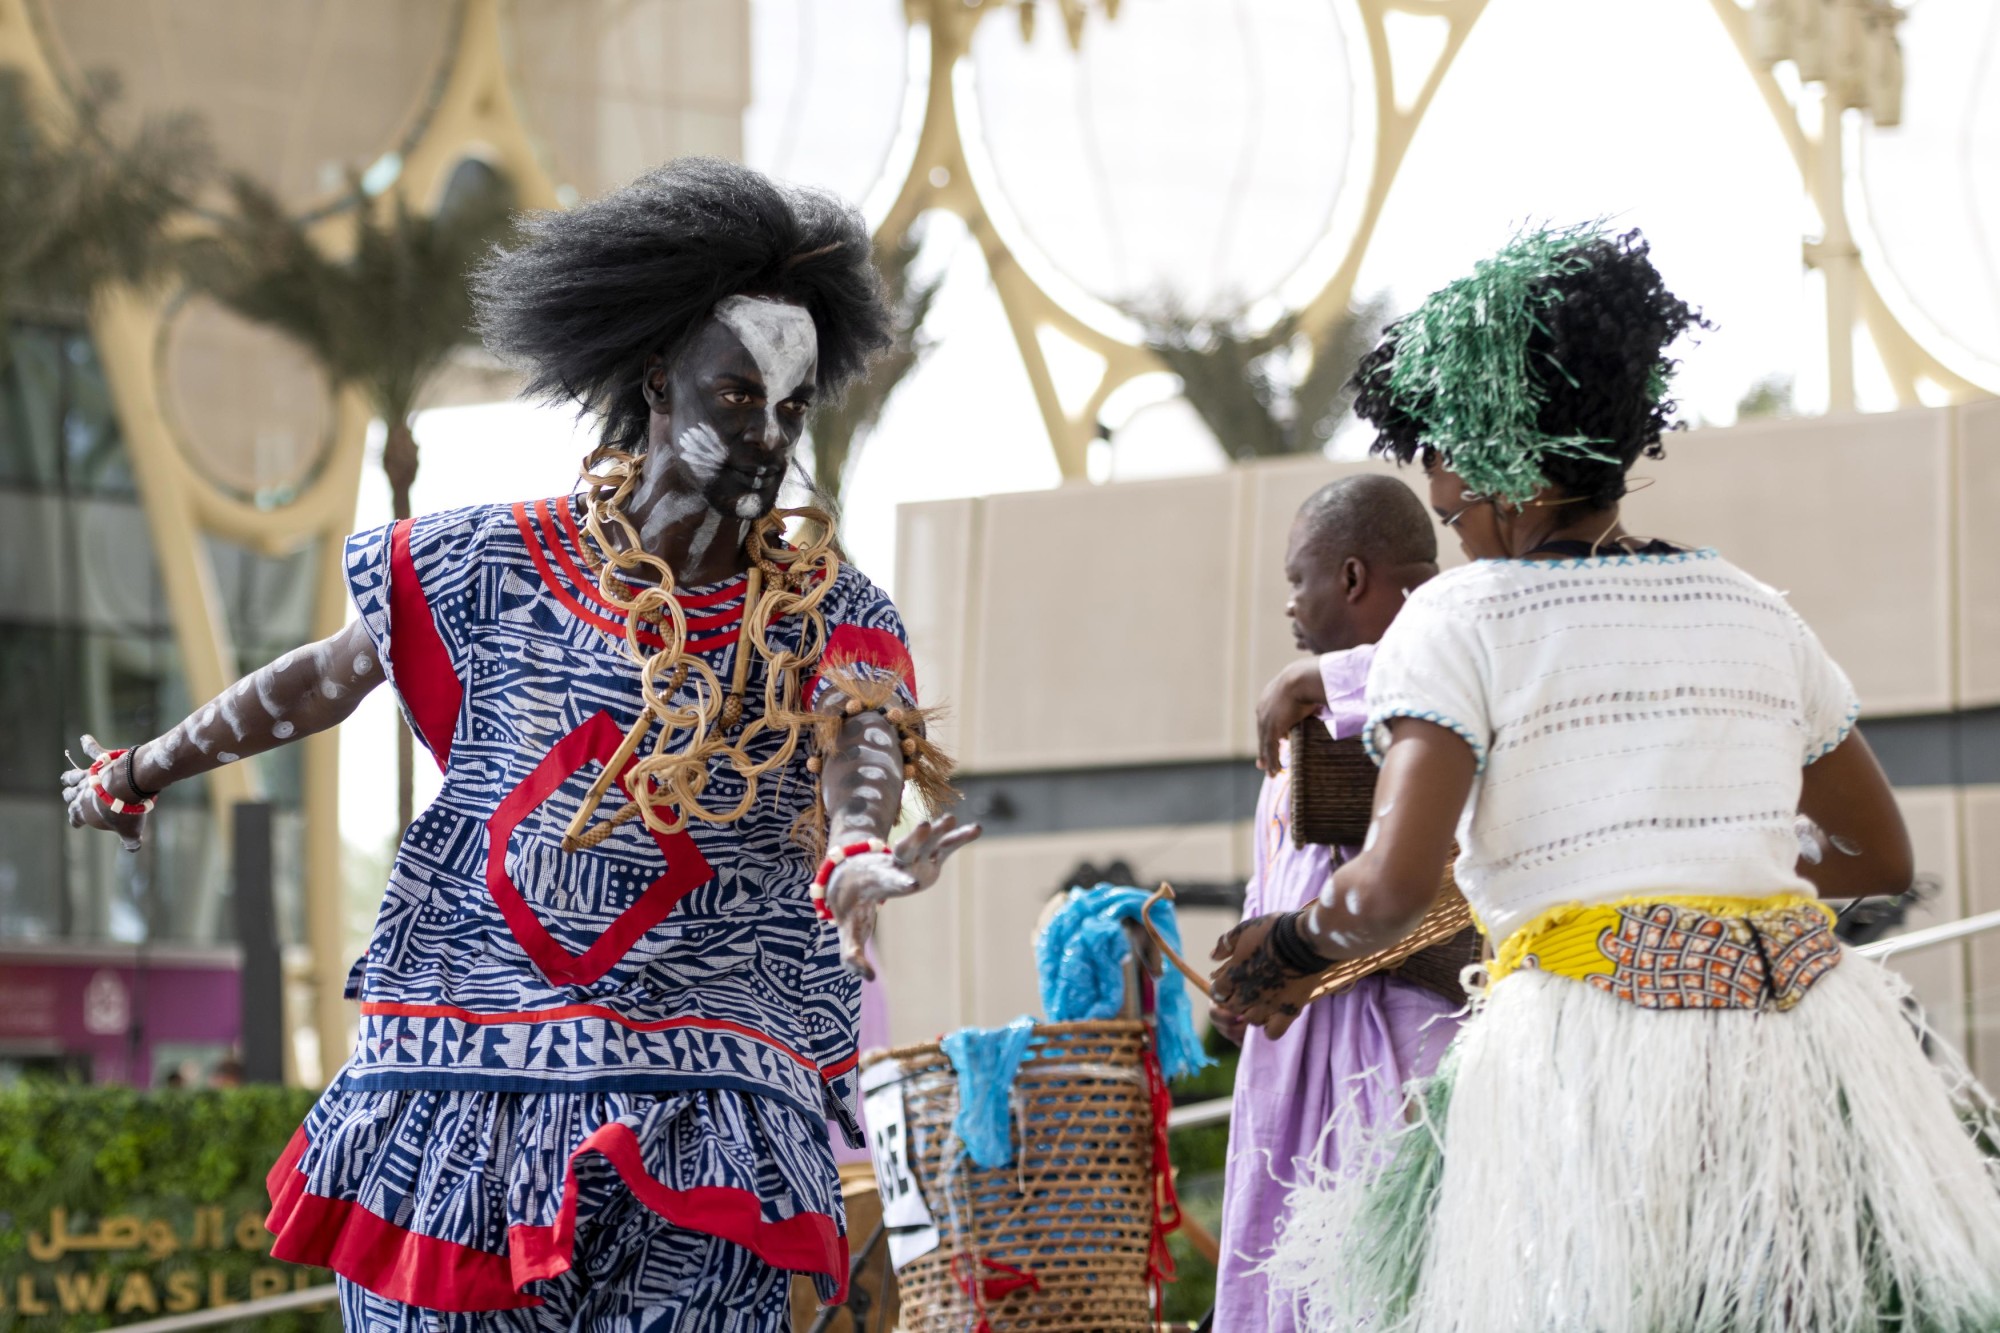 Cultural performance during the Cameroon National Day Ceremony at Al Wasl m62027